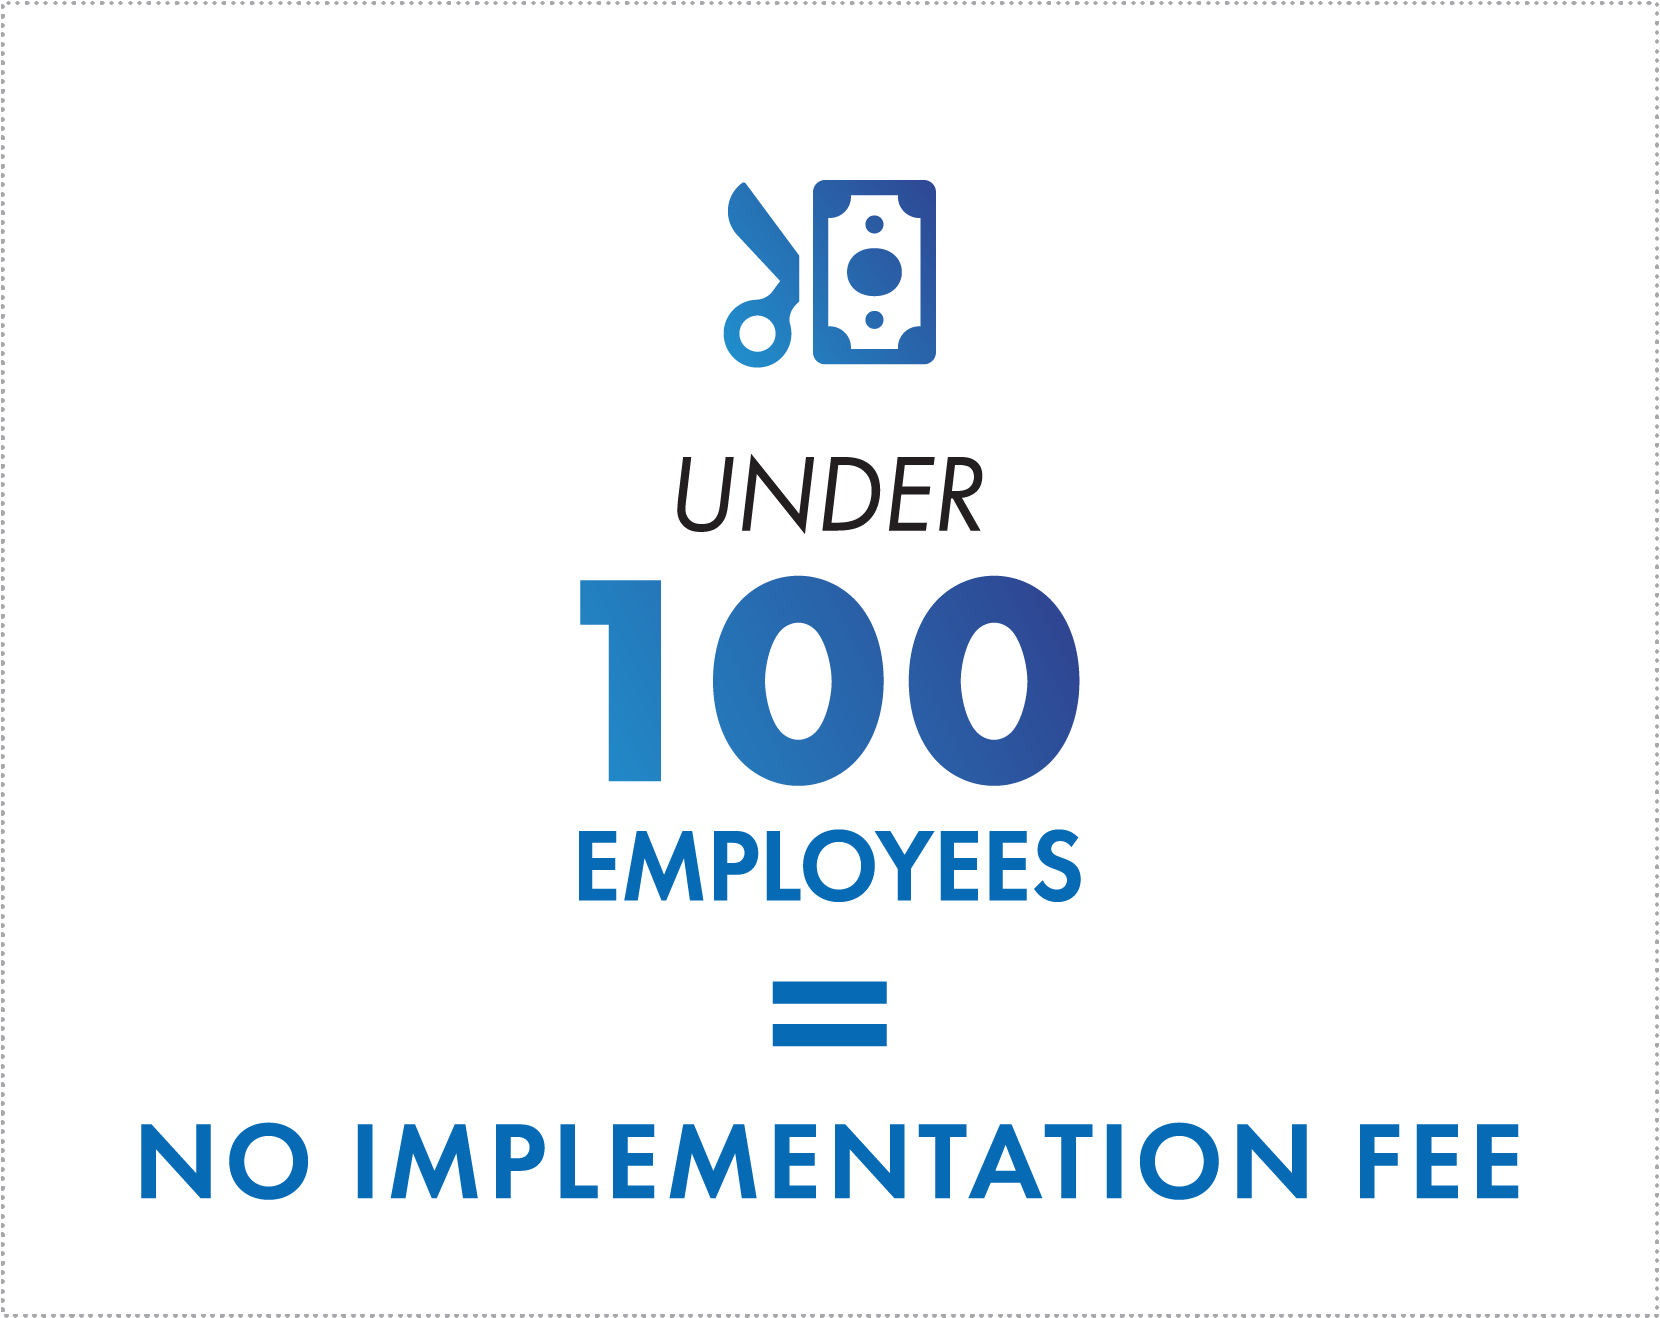 No Implementation Fee